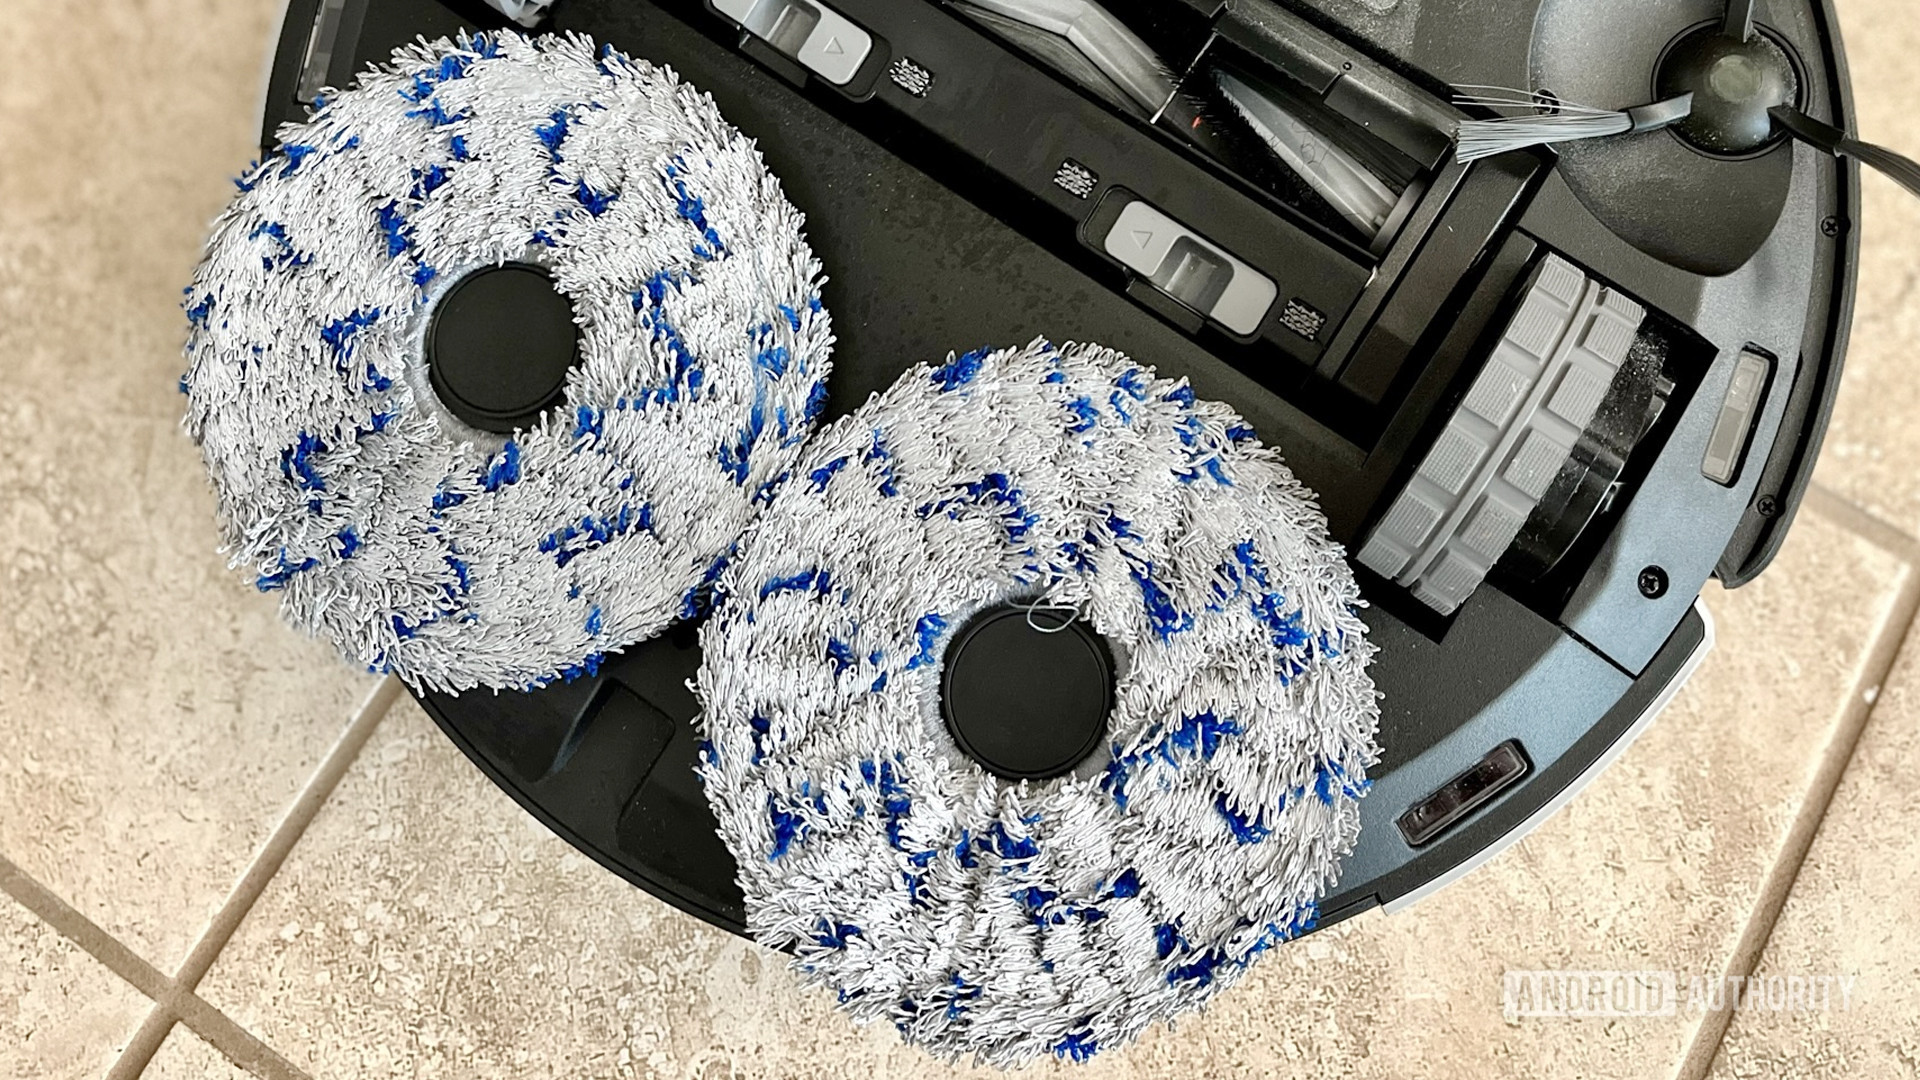 The mopping pads on the Deebot X1 Omni